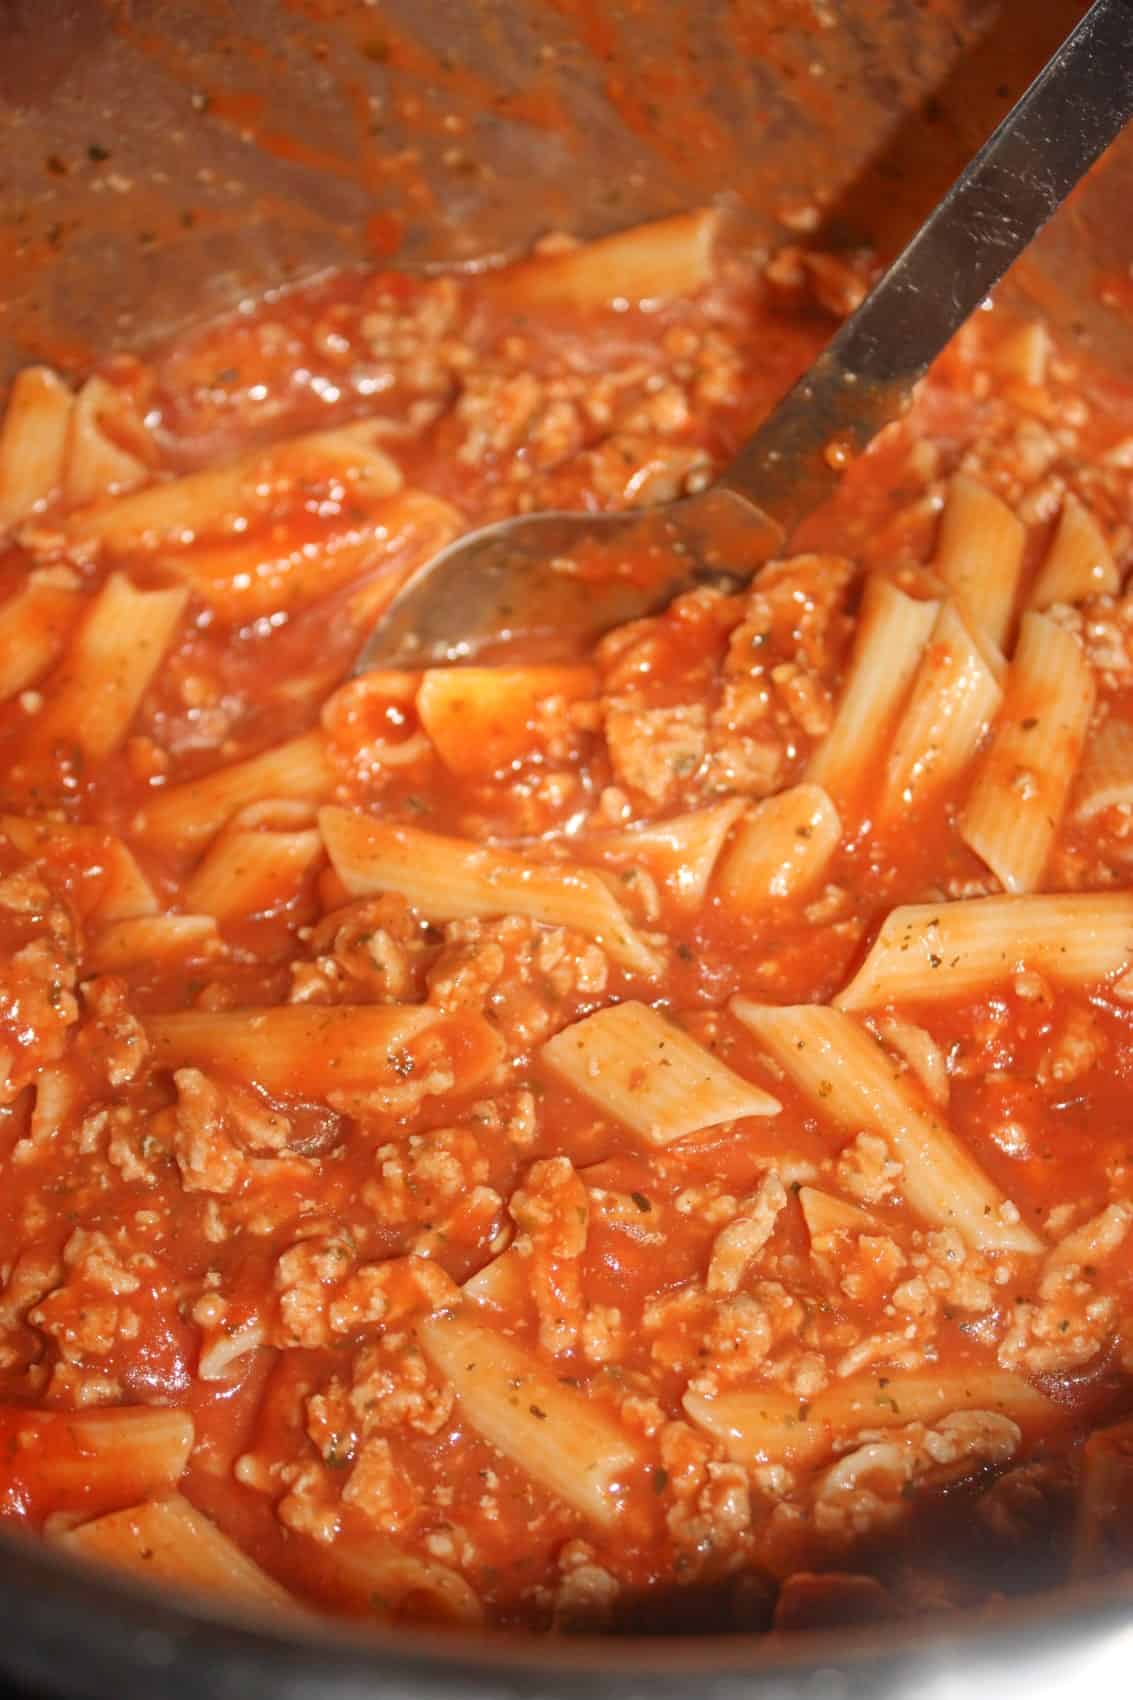 Instant Pot Pasta and Meat Sauce is a simple pressure cooker recipe that can be prepared in under 30 minutes. It is loaded with meat sauce and gluten free pasta.